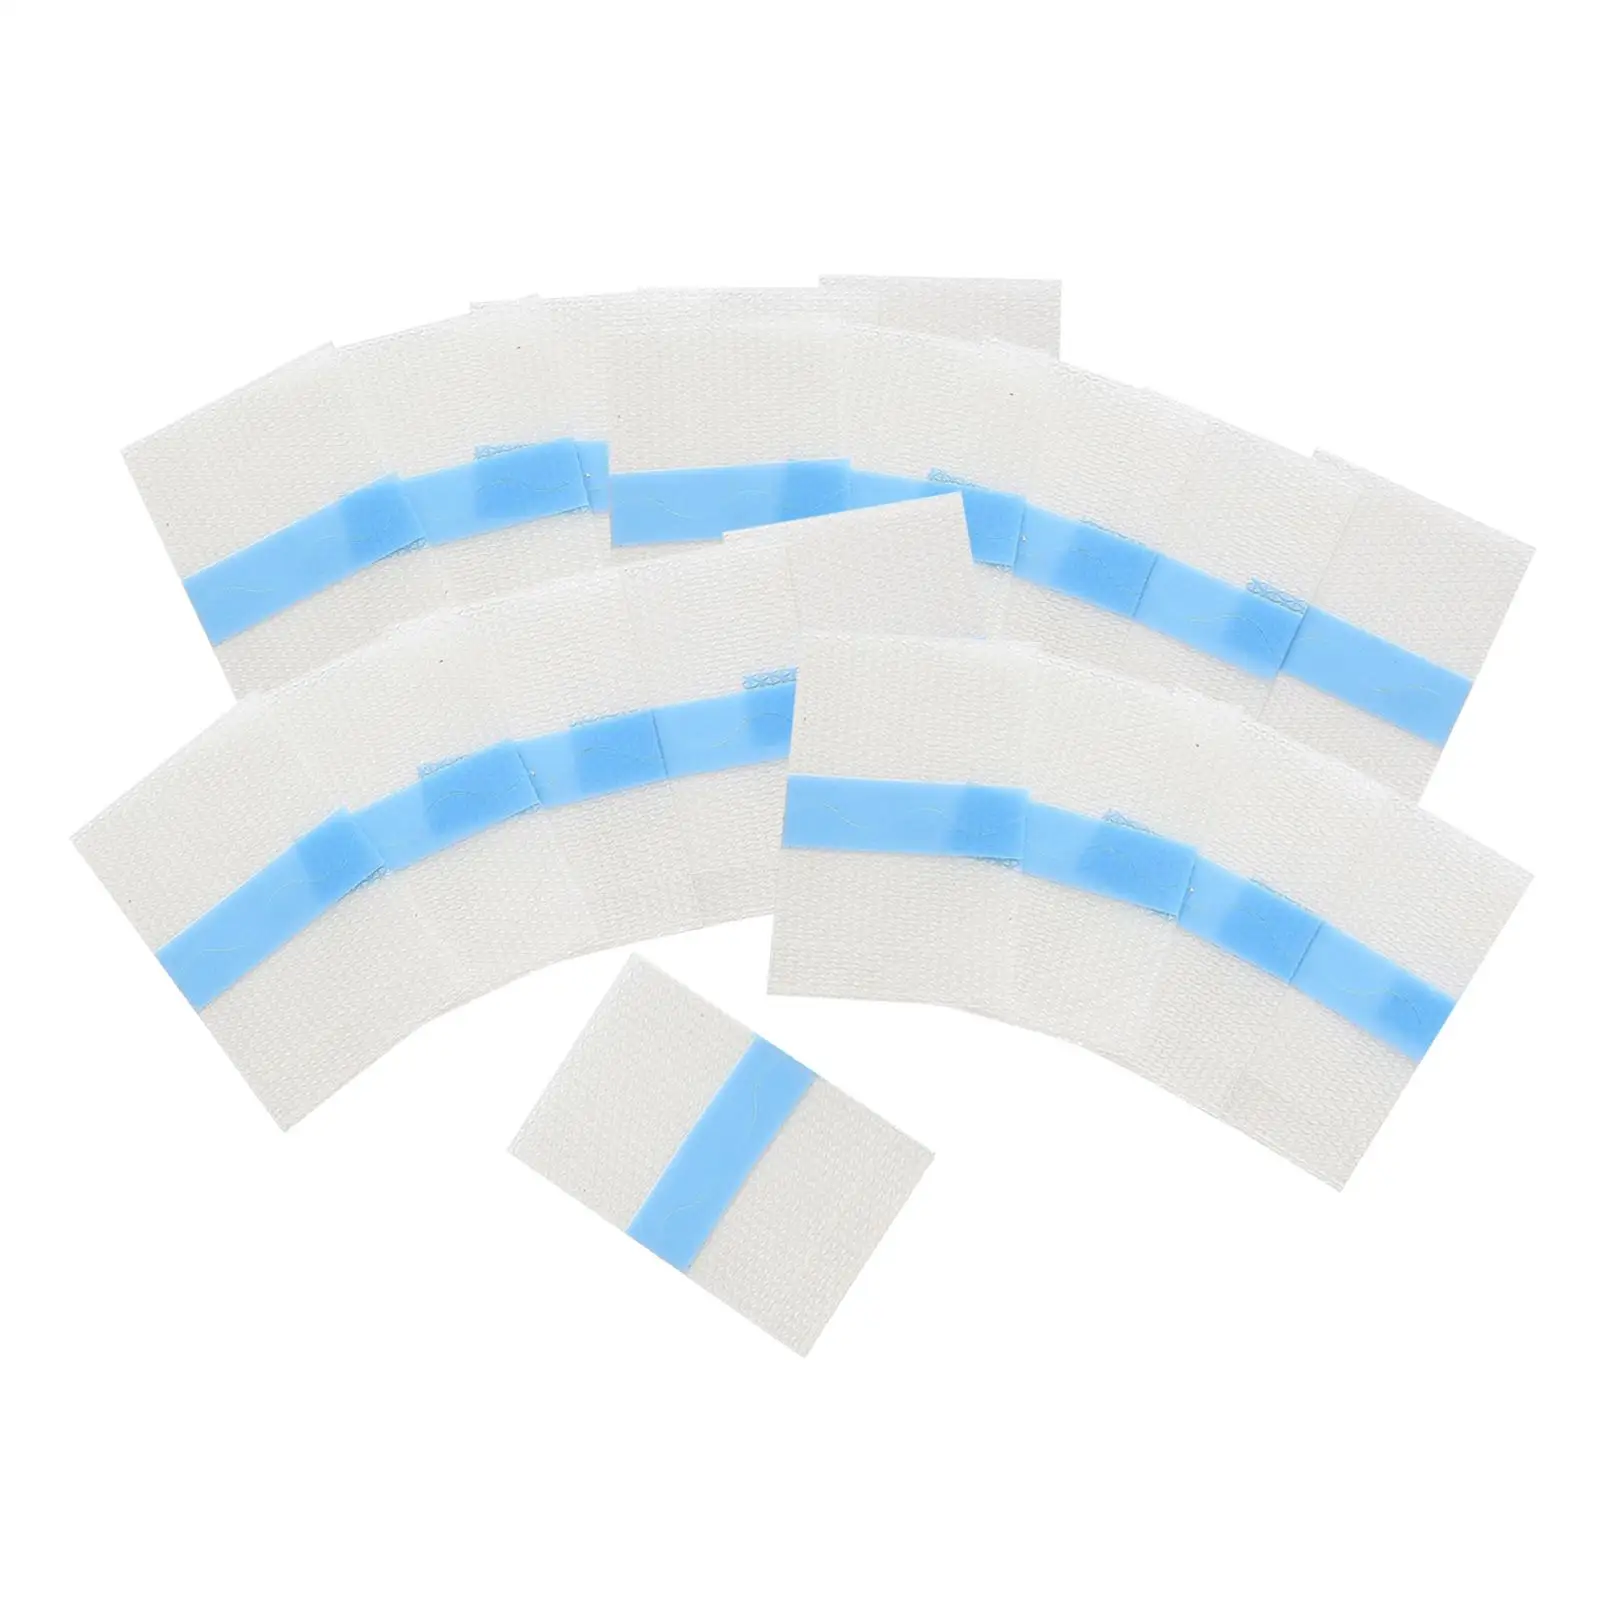 20 Pieces Waterproof Ear Stickers Ear Covers Portable Ear Protection Covers for Shower Swimming Water Surfing Children